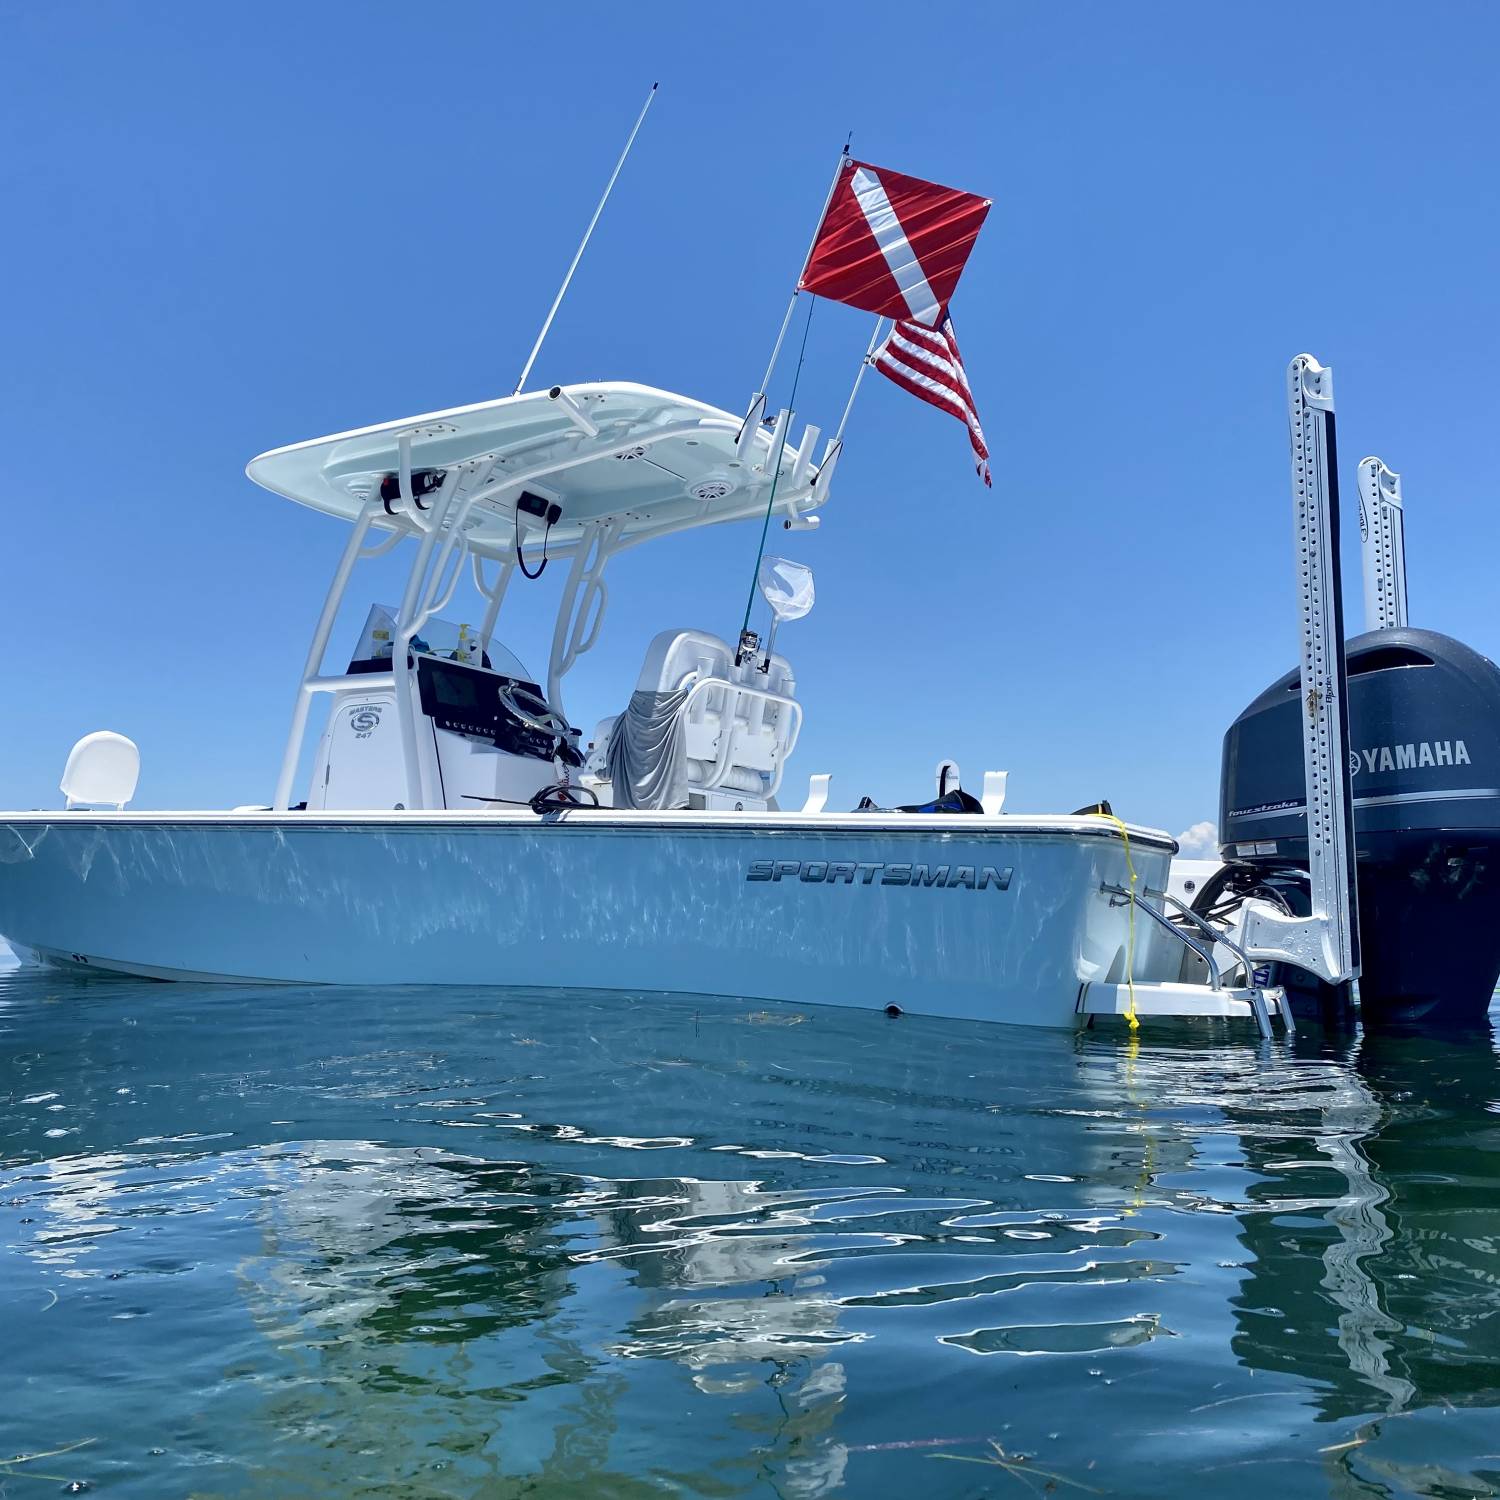 Title: Independence Day! - On board their Sportsman Masters 247 Bay Boat - Location: Homosassa, FL. Participating in the Photo Contest #SportsmanJuly